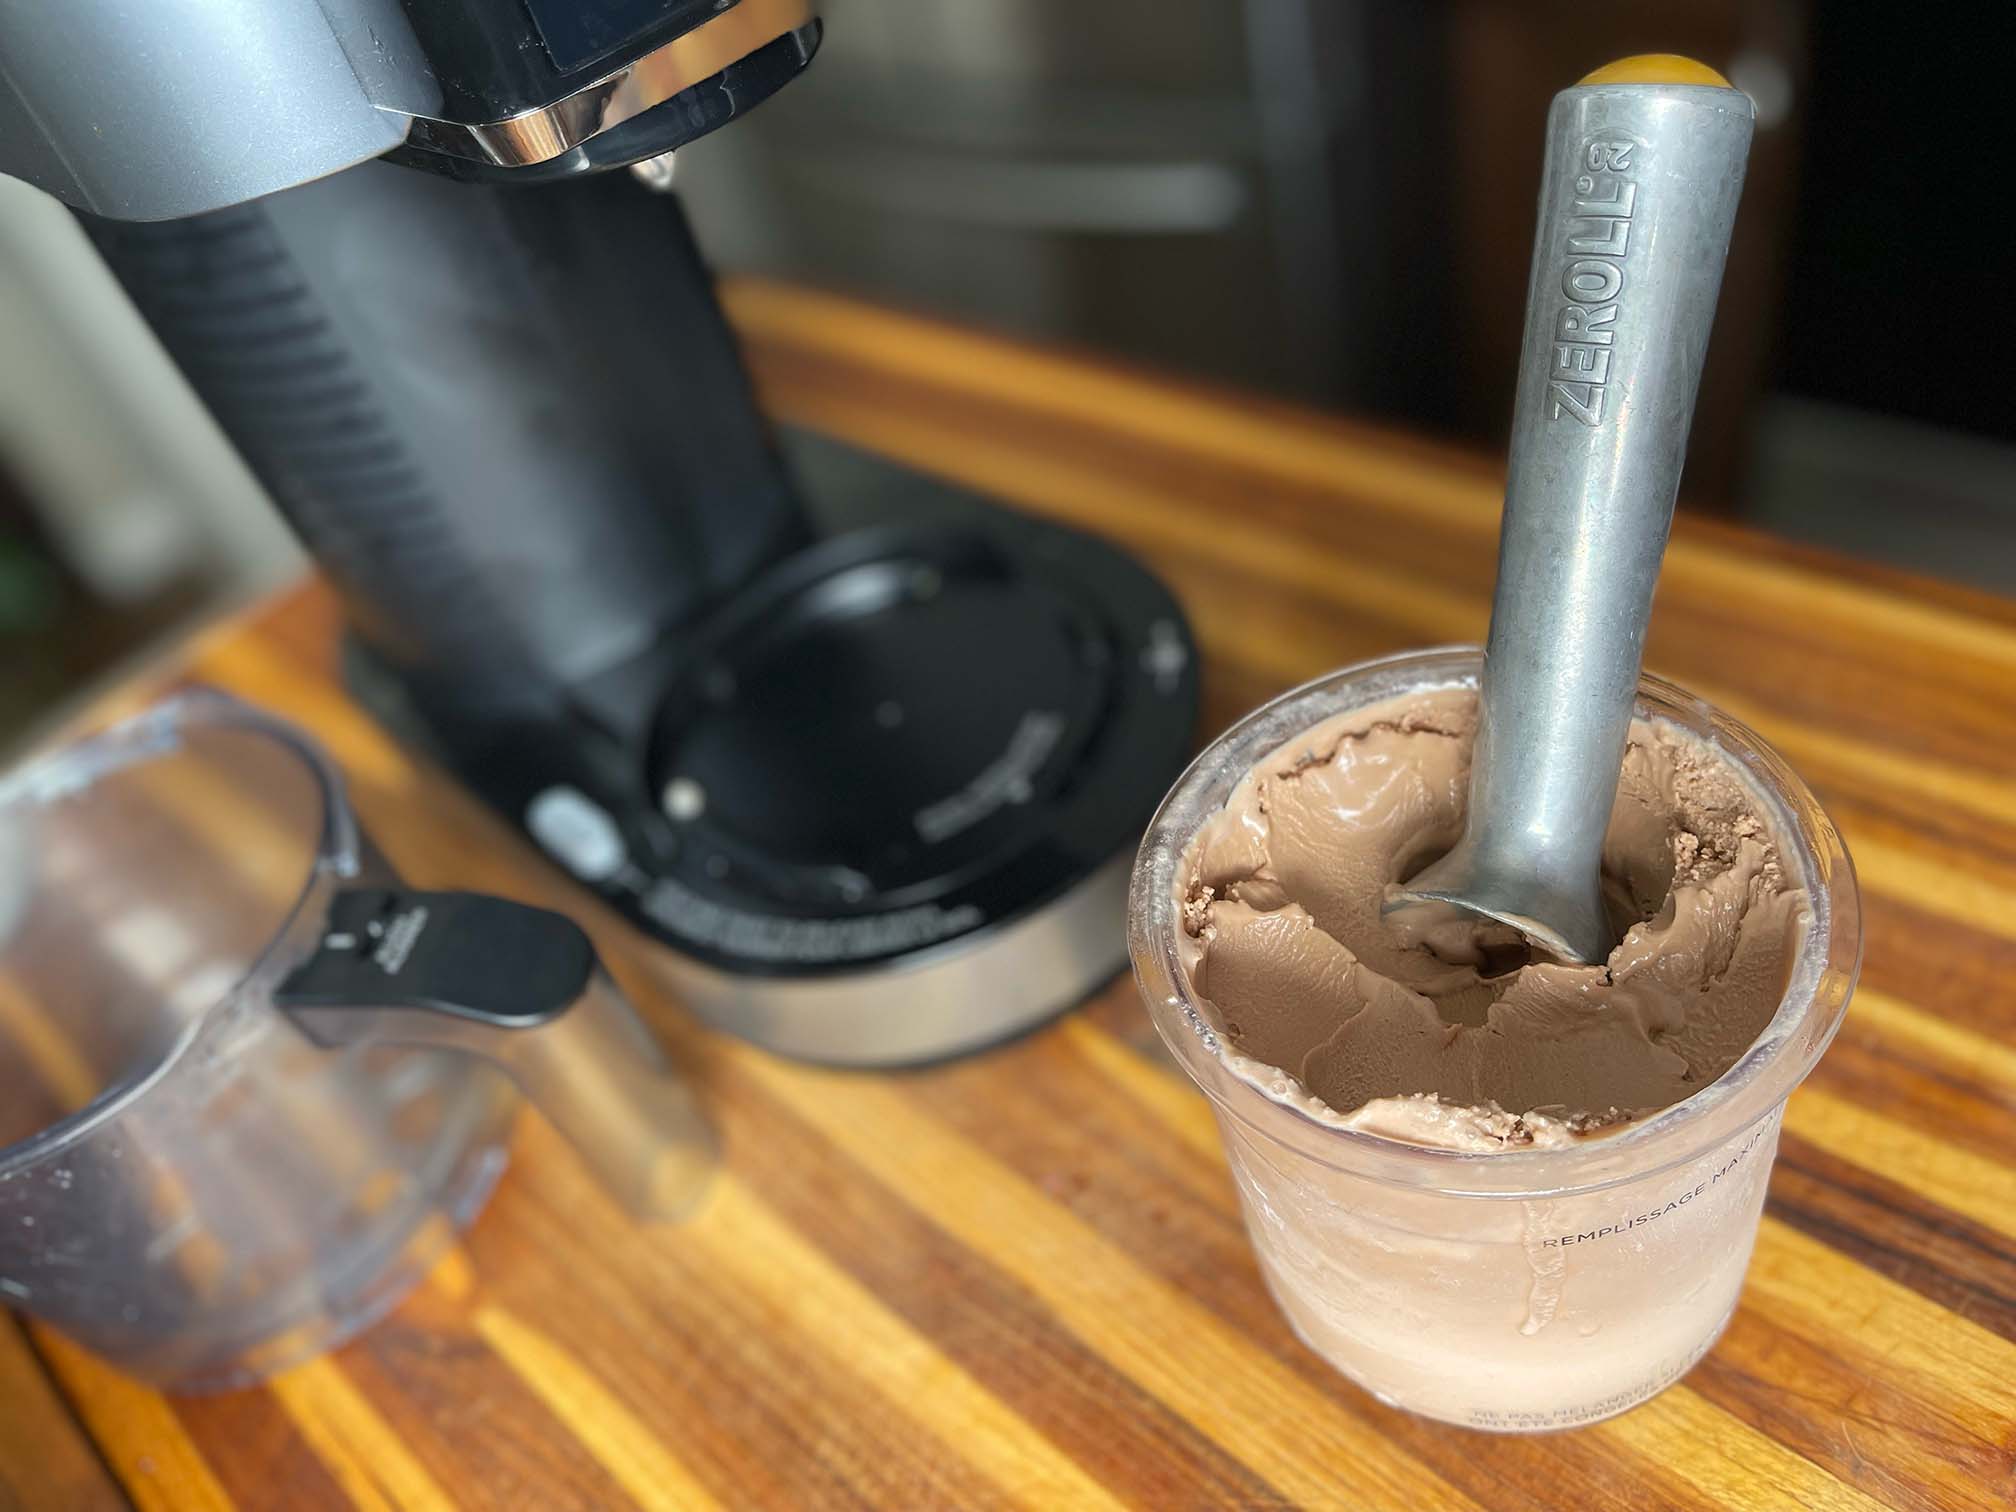 https://www.sizzleandsear.com/wp-content/uploads/2021/12/ninja-creami-review-chocolate-ice-cream-with-scoop.jpg